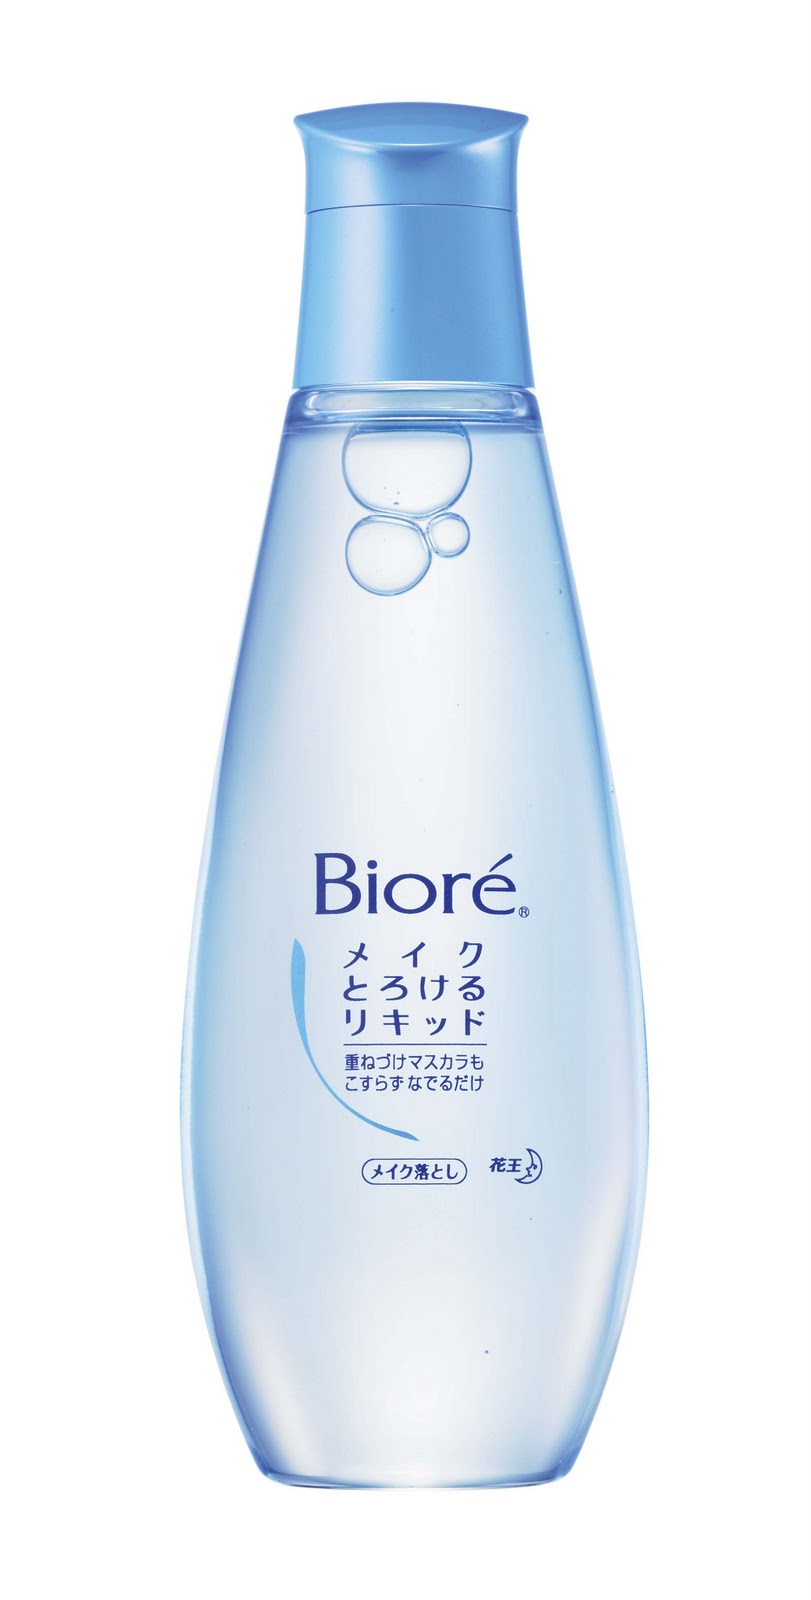 DHC Cleansing Oil, Biore Makeup remover